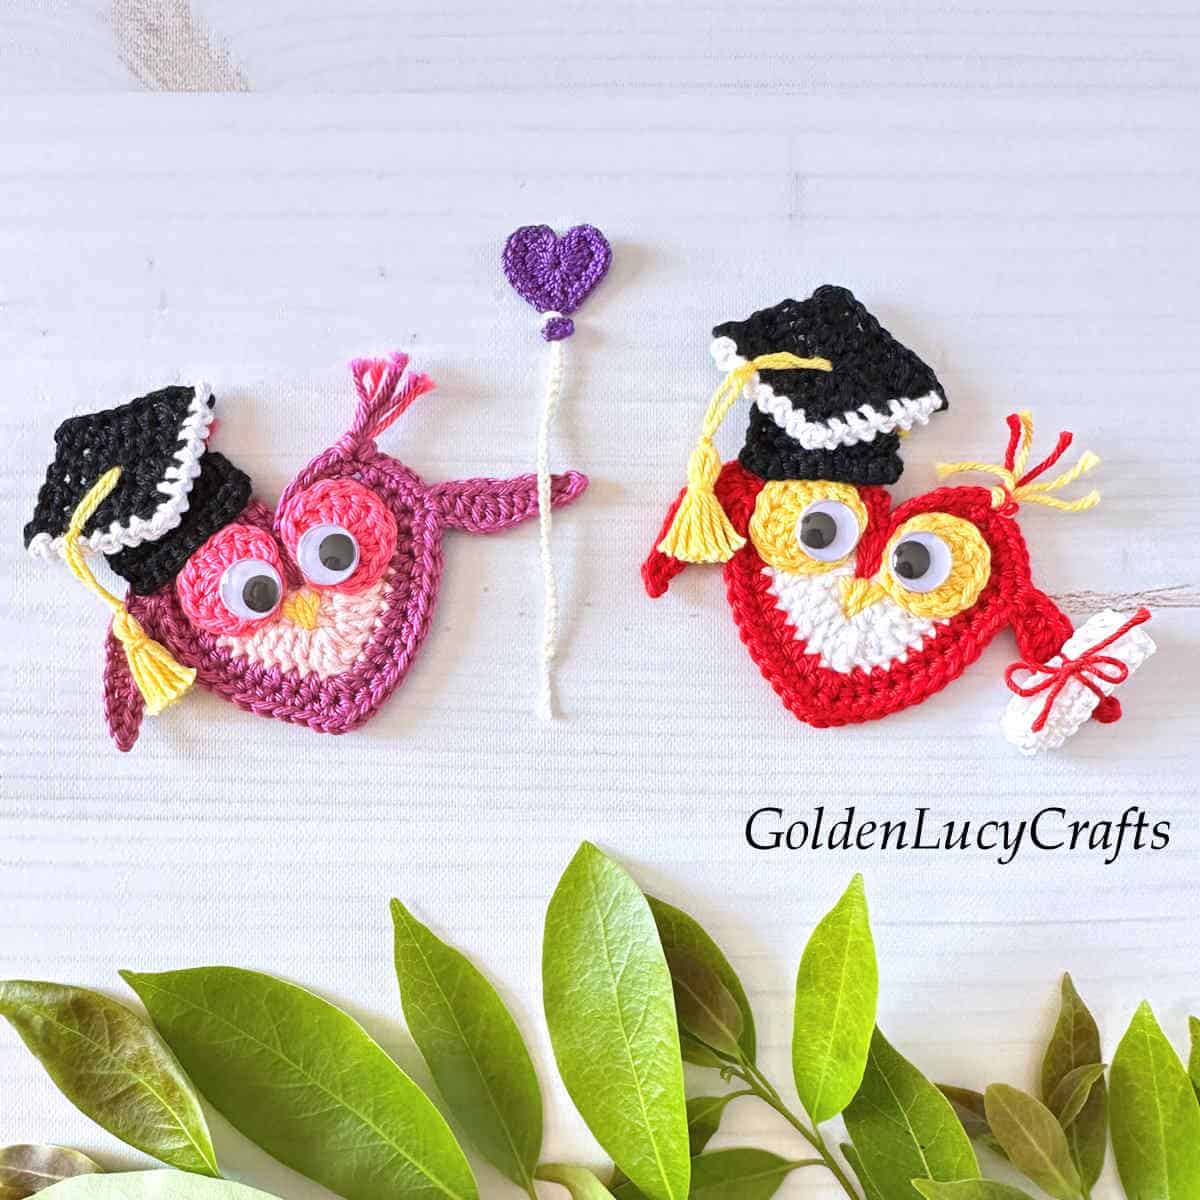 Two crochet graduation owls - owl with balloon, and owl with diploma.